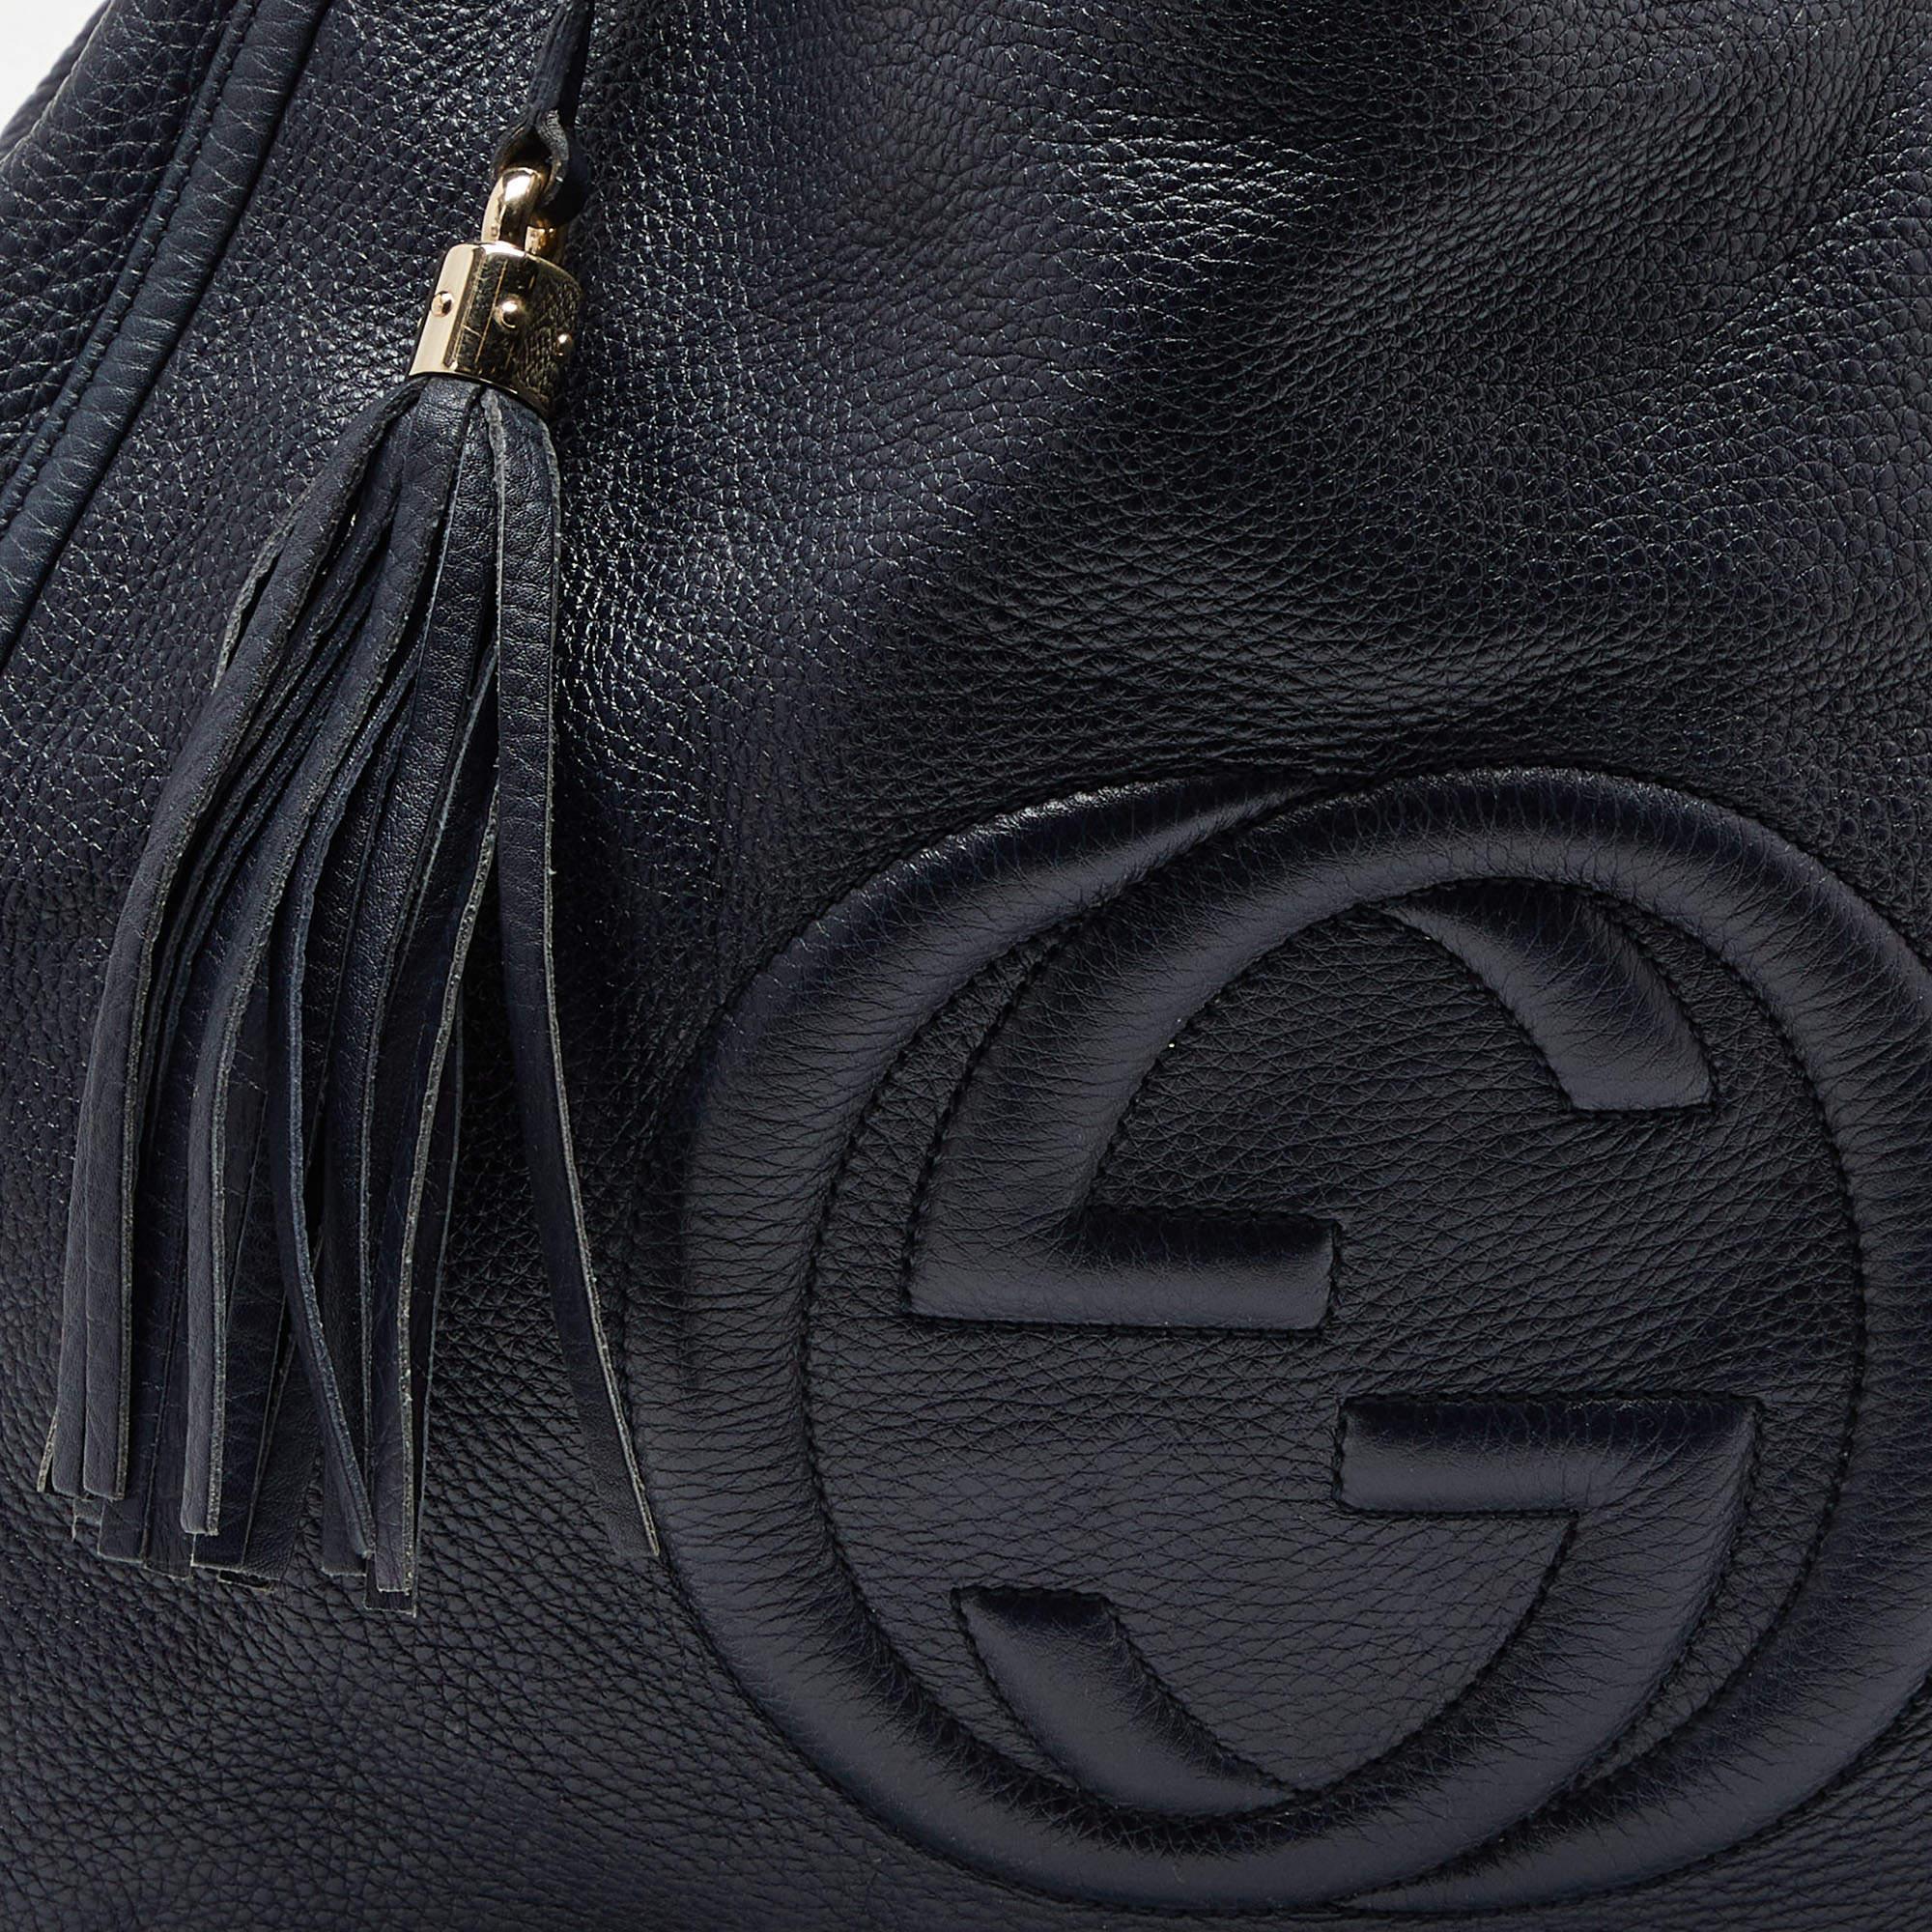 Gucci Blue Leather Large Soho Shopper Tote For Sale 5